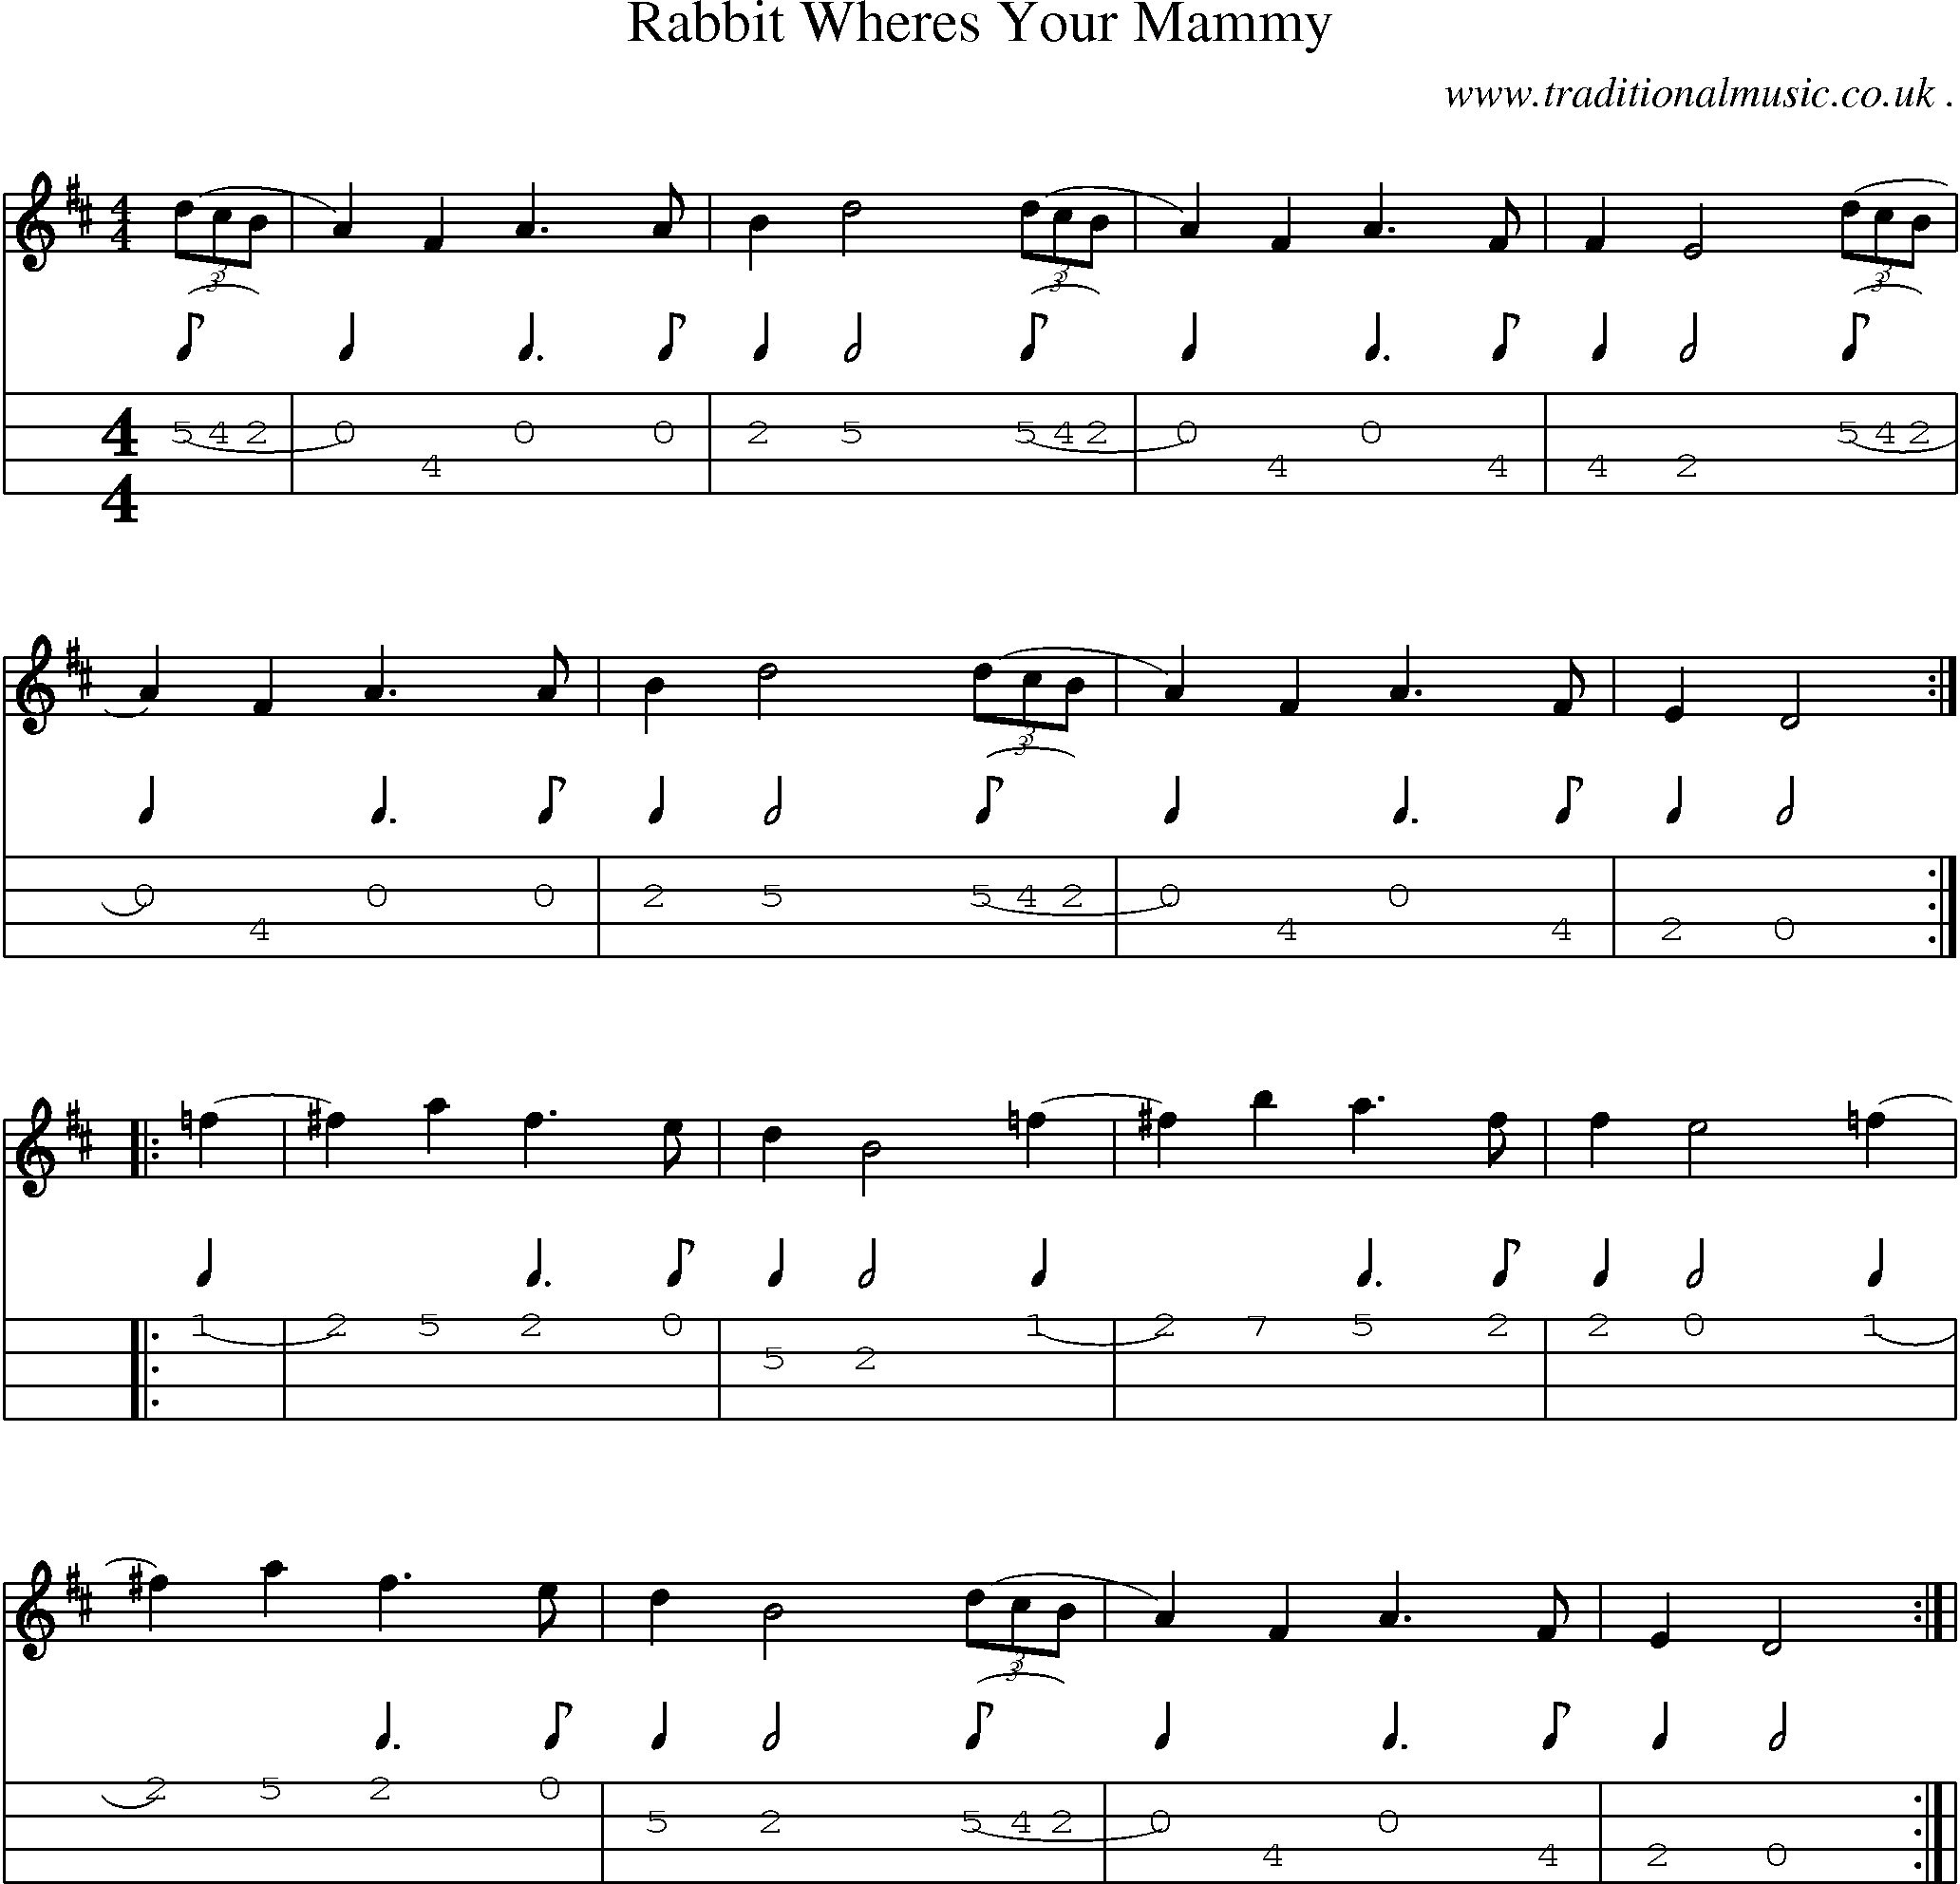 Music Score and Mandolin Tabs for Rabbit Wheres Your Mammy